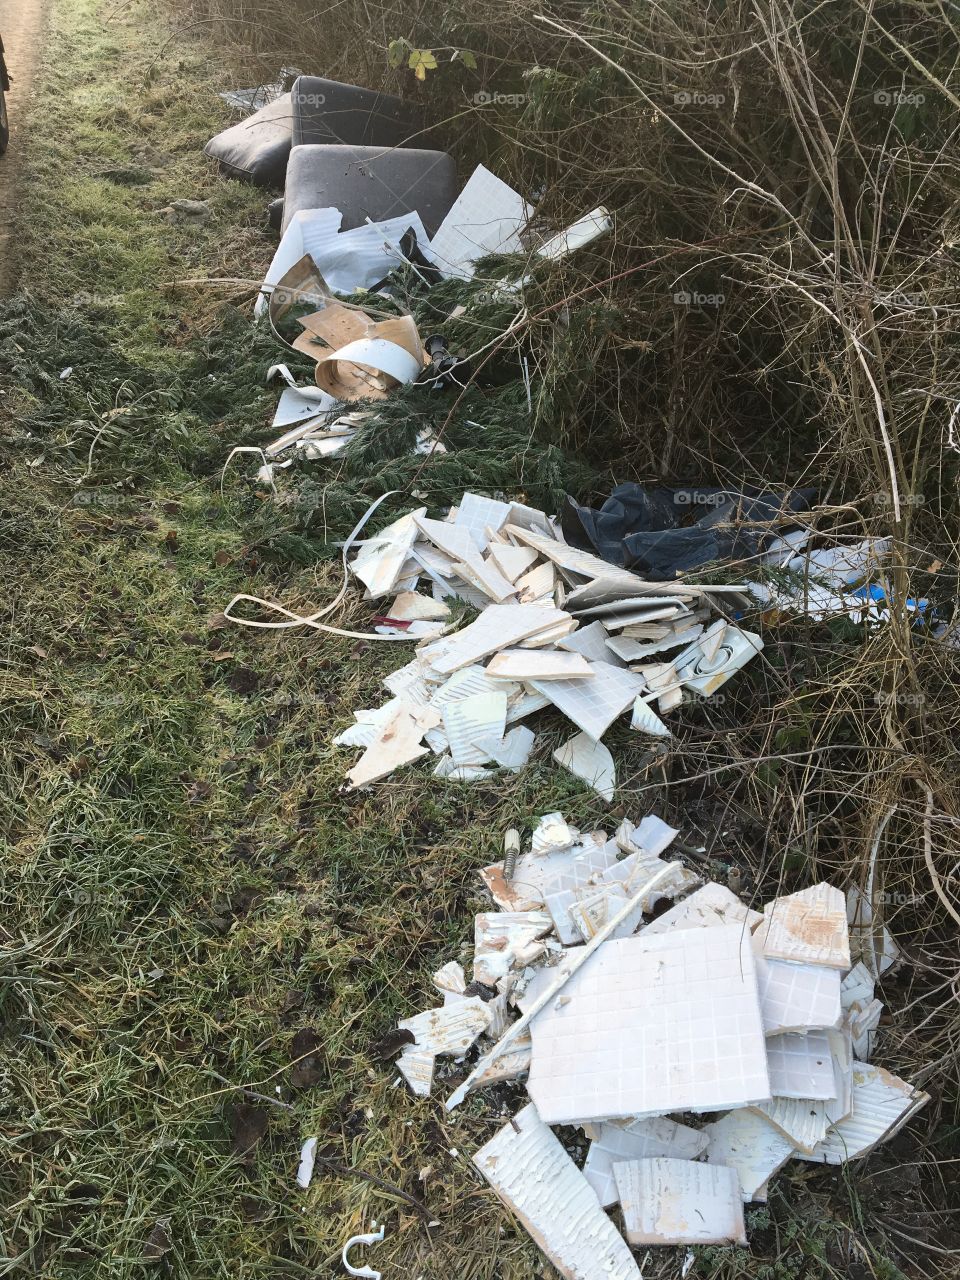 Flytip cleared 